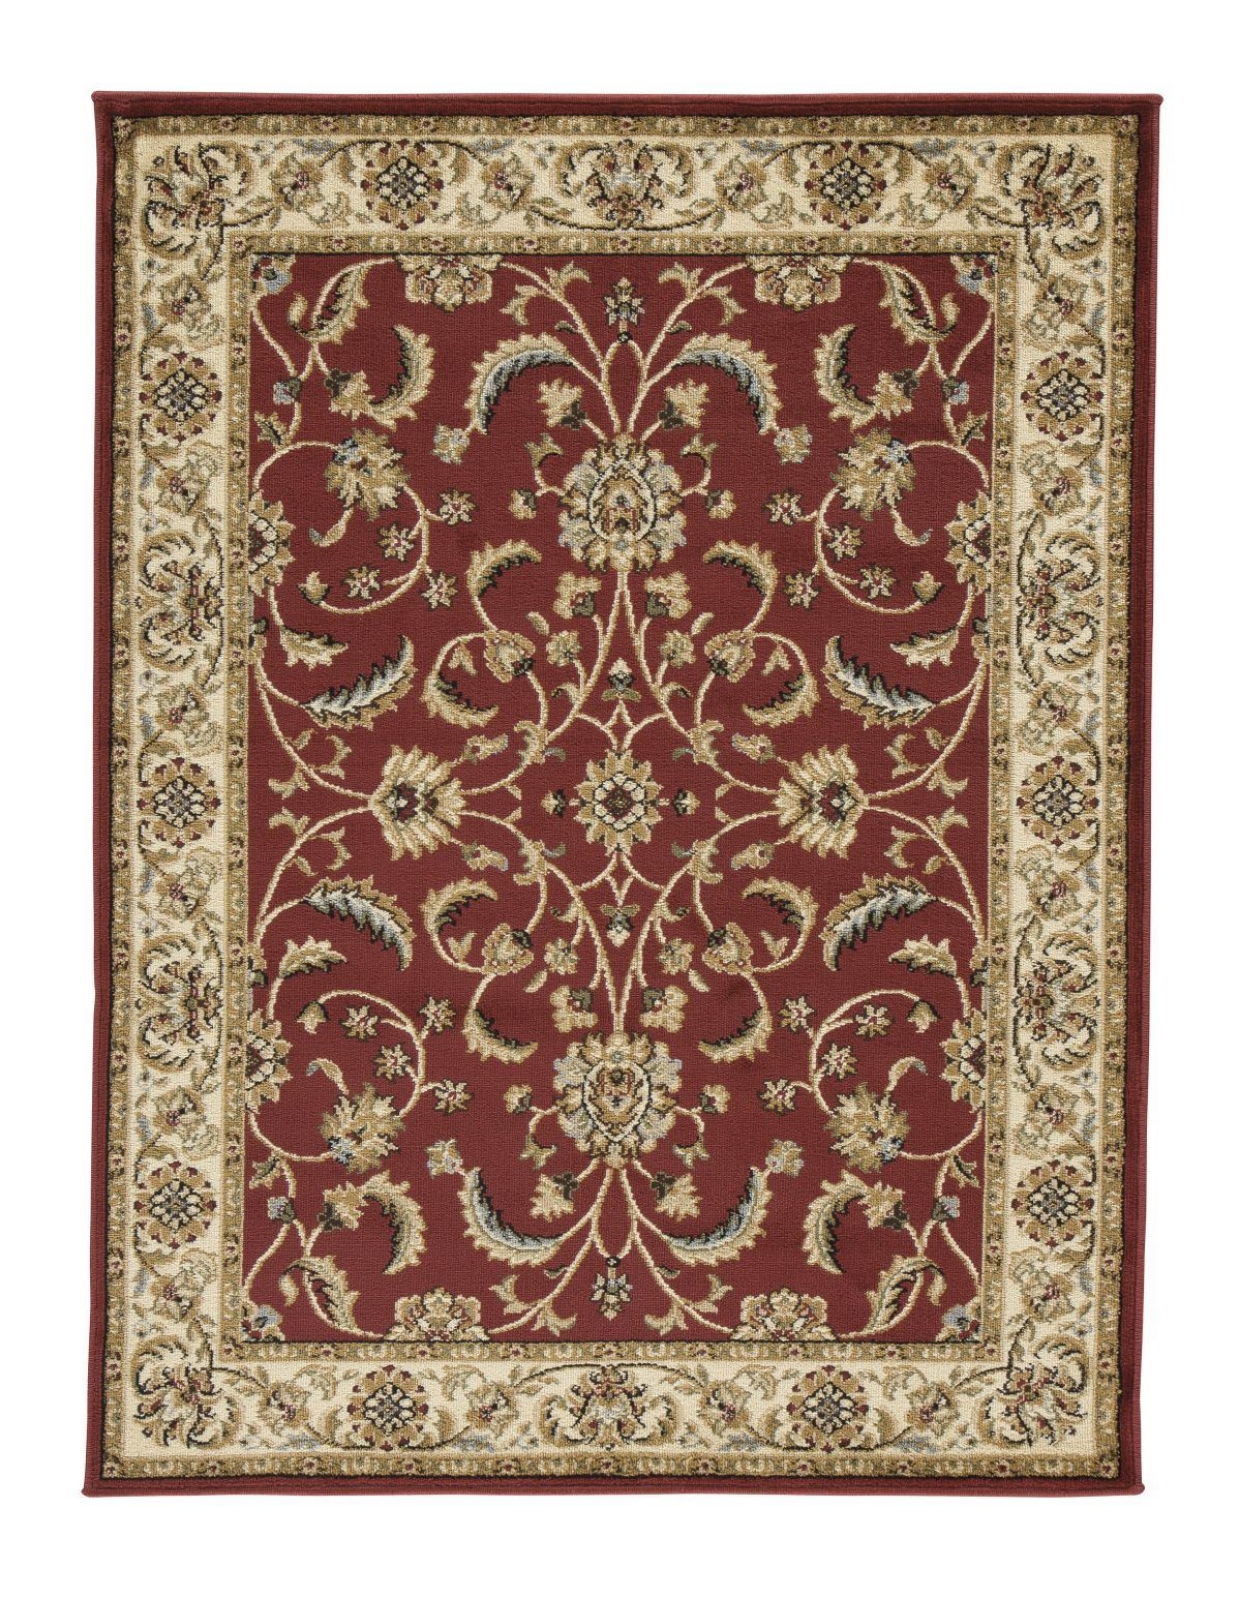 Picture of Jamirah Large Rug